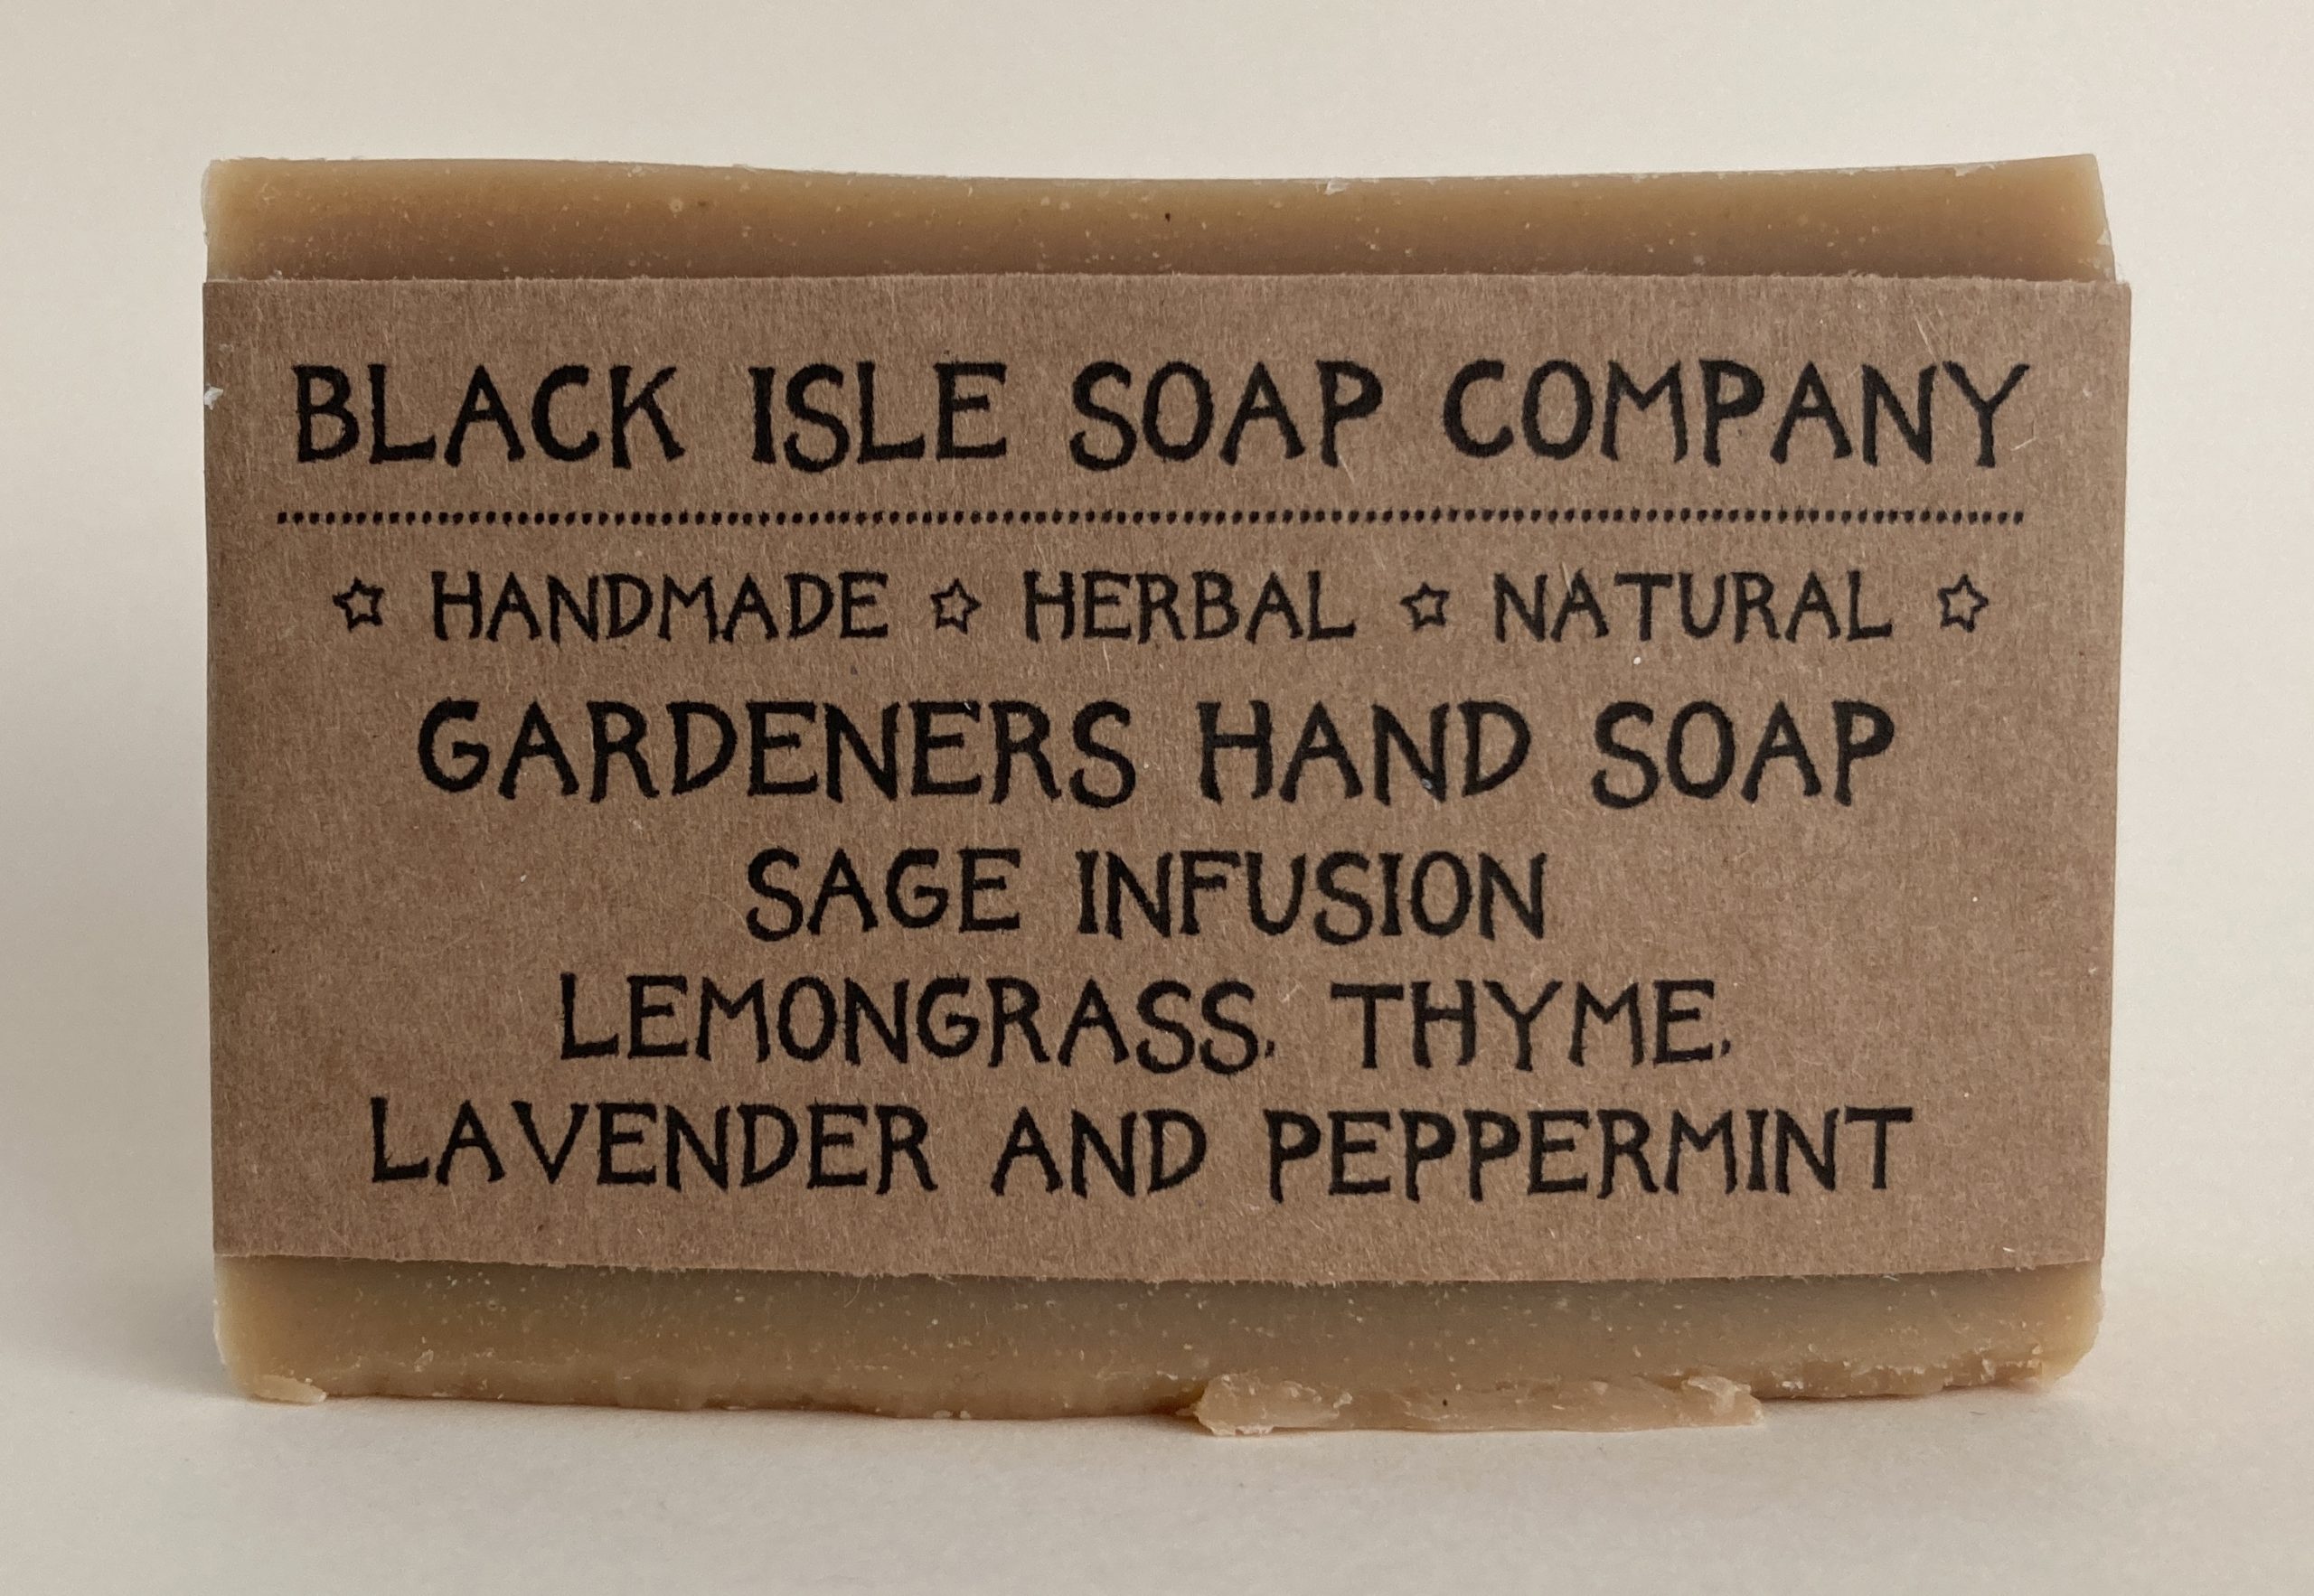 The Gardeners Hand Soap, scented with lemongrass, thyme, lavender and peppermint this soap bar has pumice added to scrub those green fingers clean. It is a deep browny orange coloured soap bar wrapped in brown paper